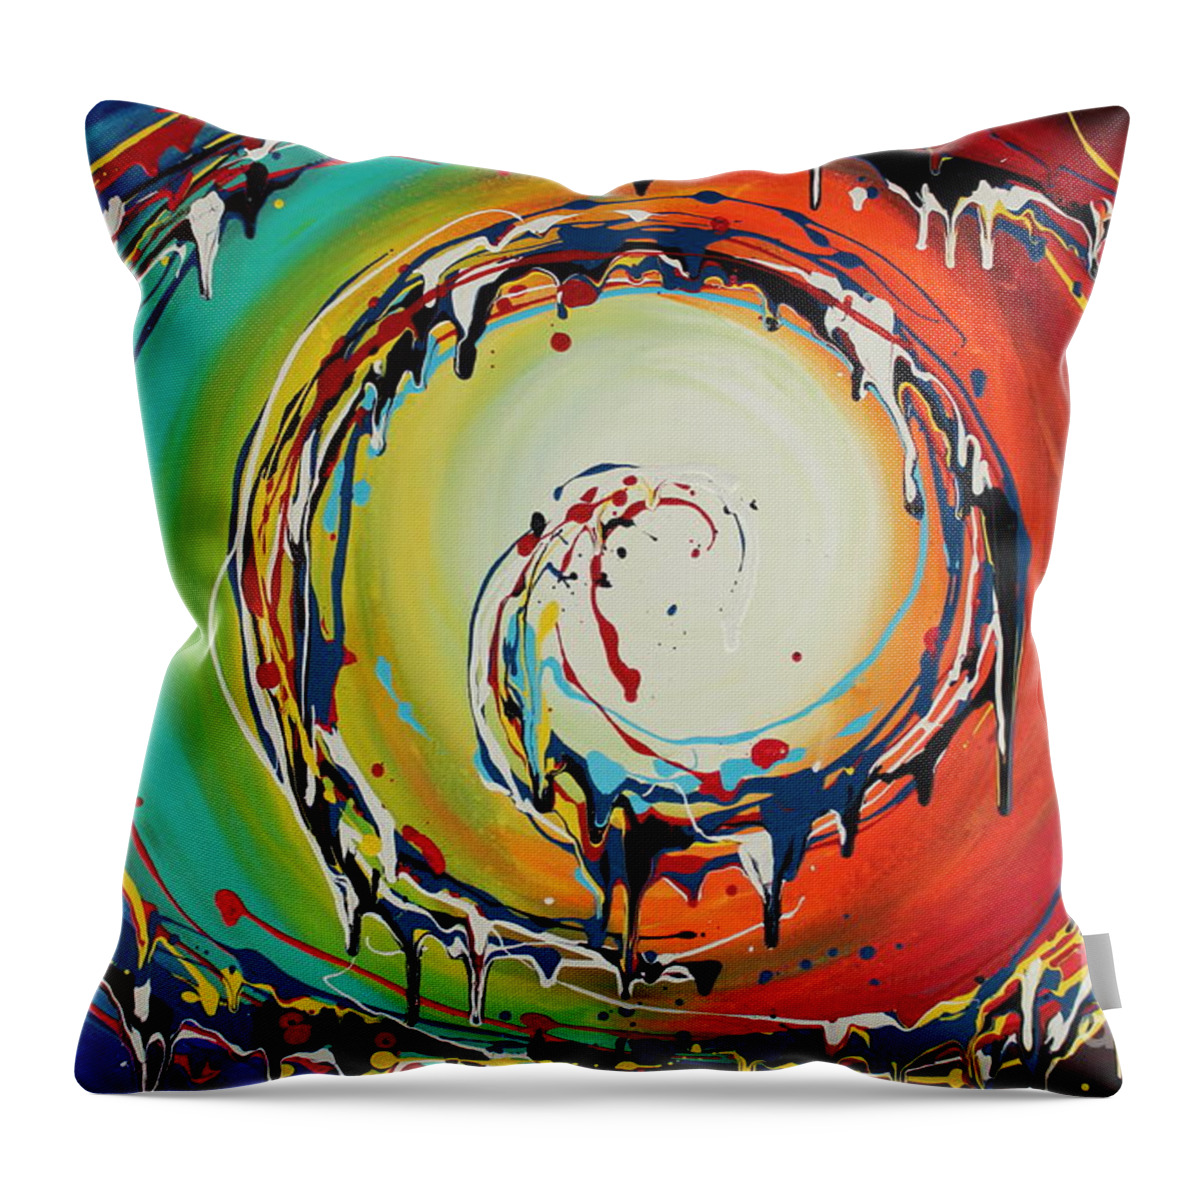 Swirl Throw Pillow featuring the painting Colorful Swirls by Preethi Mathialagan